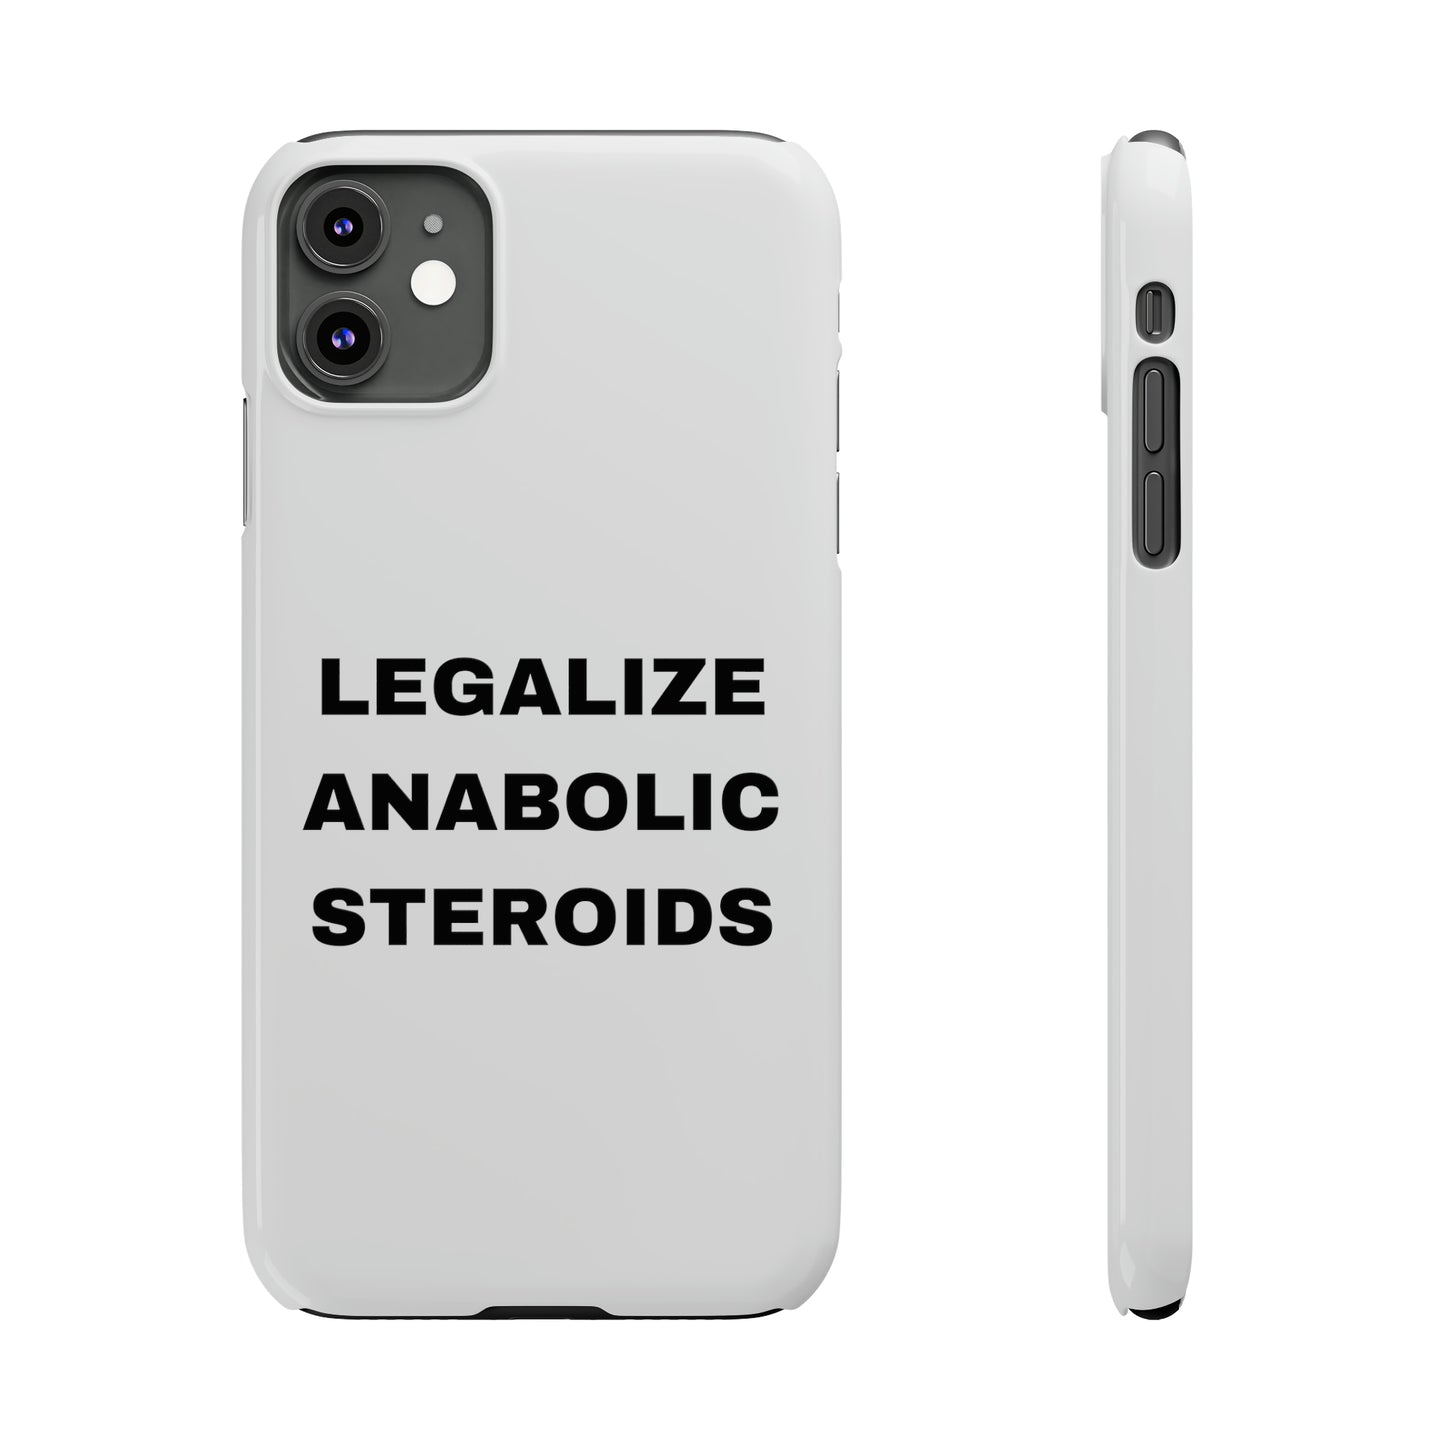 LEGALIZE ANABOLIC STEROIDS iPhone Case